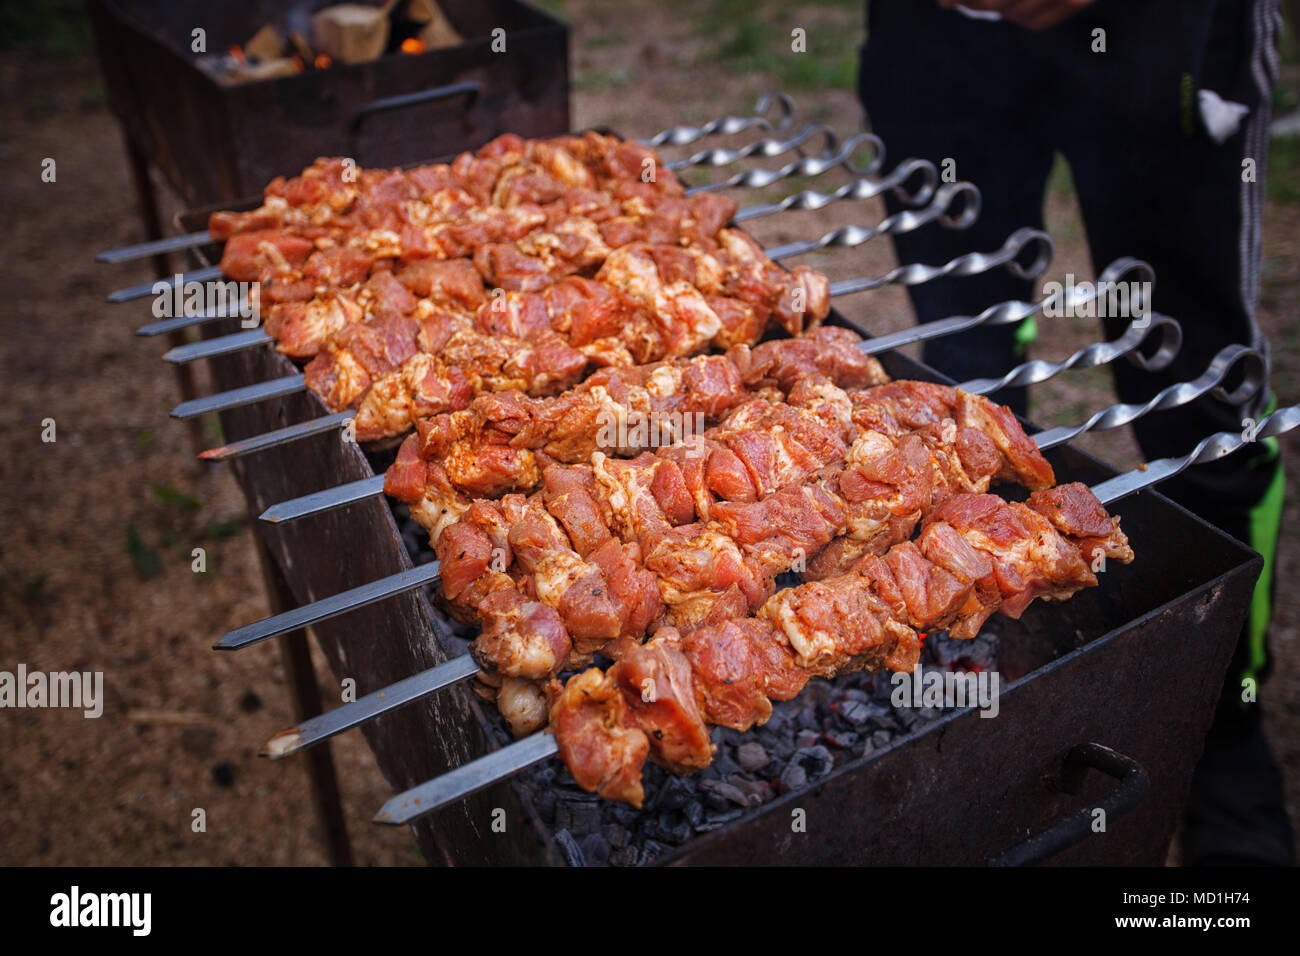 Delicious barbecue kebab grilling on open grill Stock Photo - Alamy